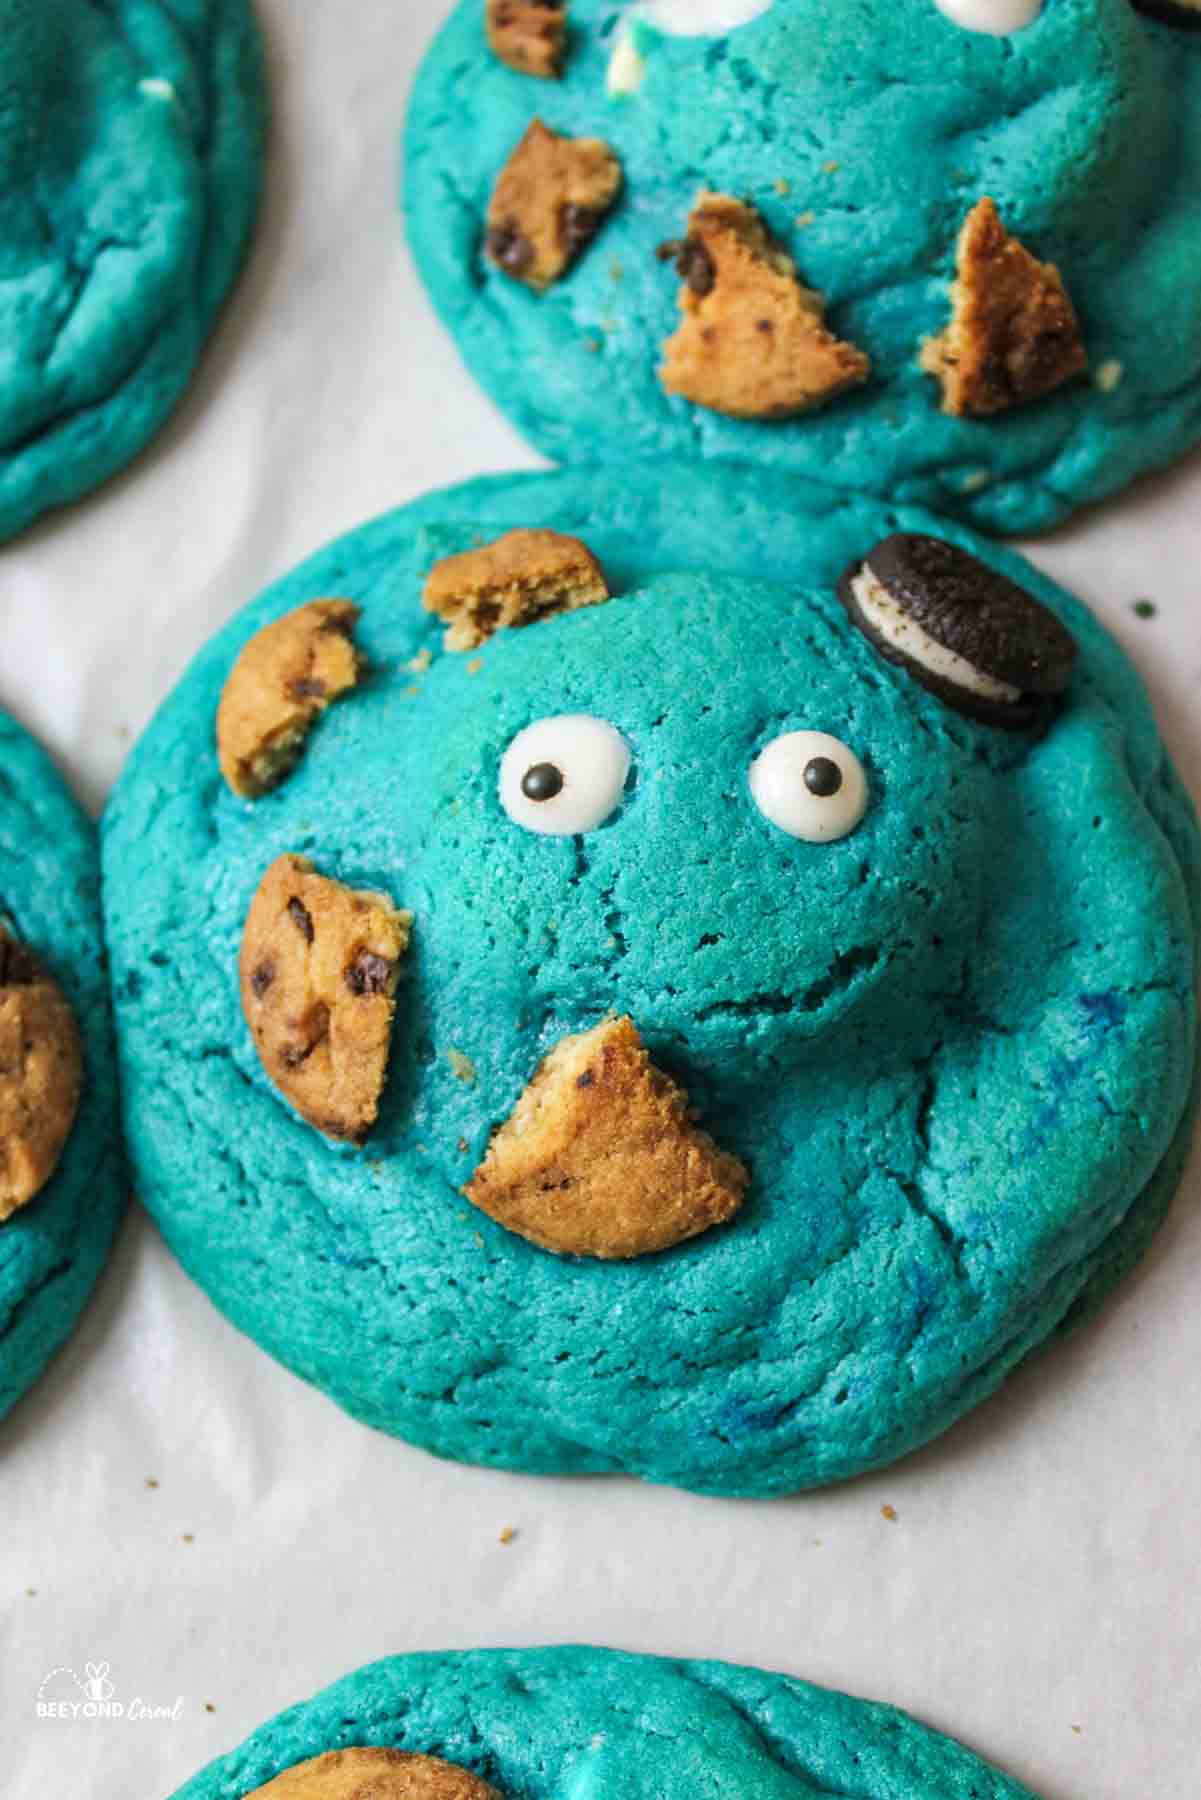 a close up of a blue cookie with candy eyes an broken smaller cookies on it